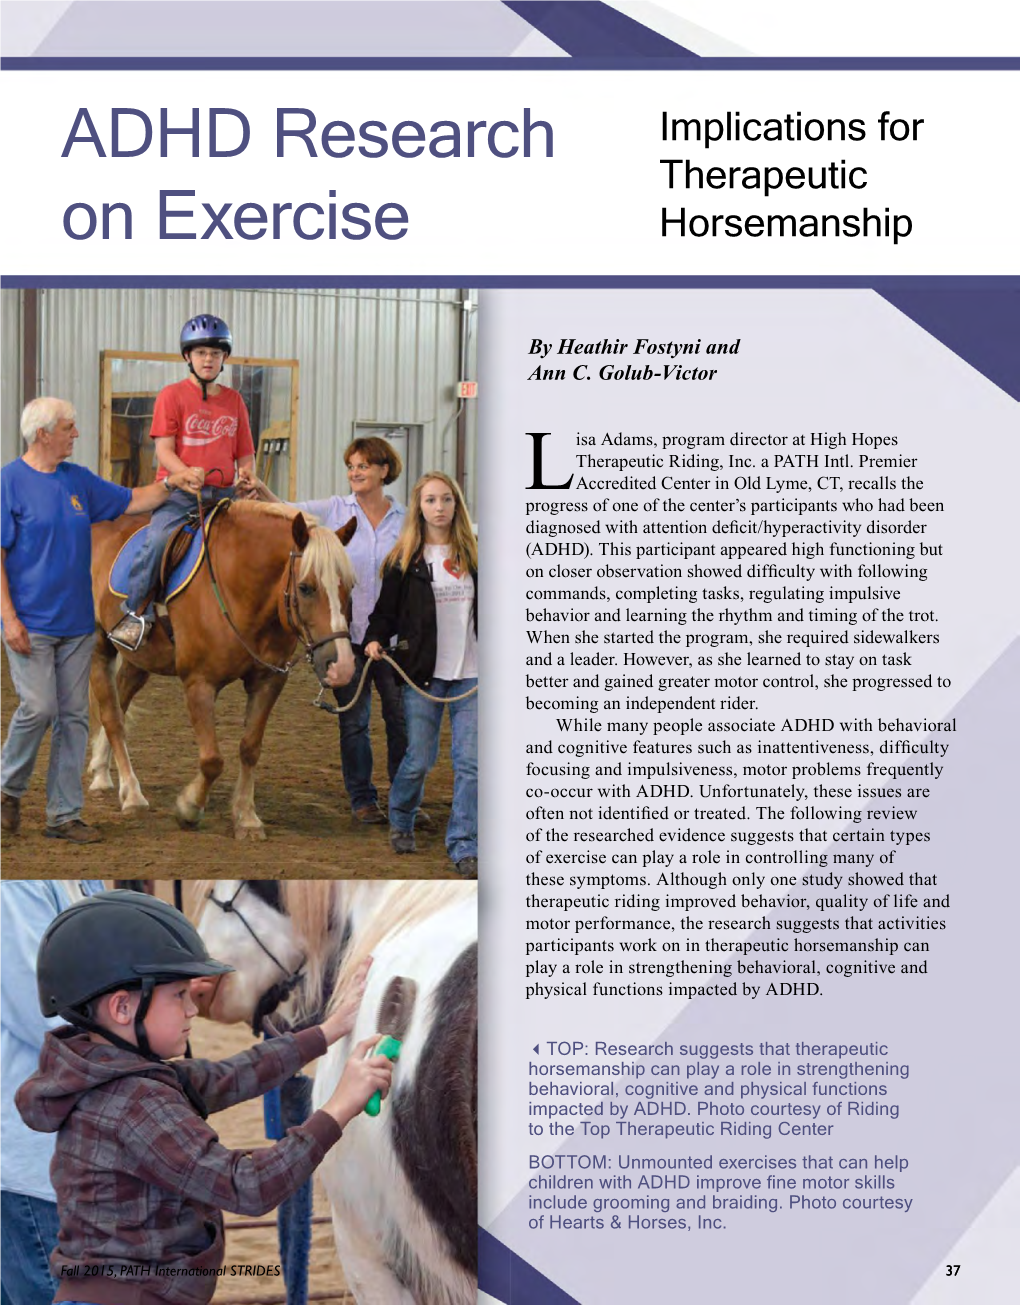 Fall 2015, ADHD Research on Exercise